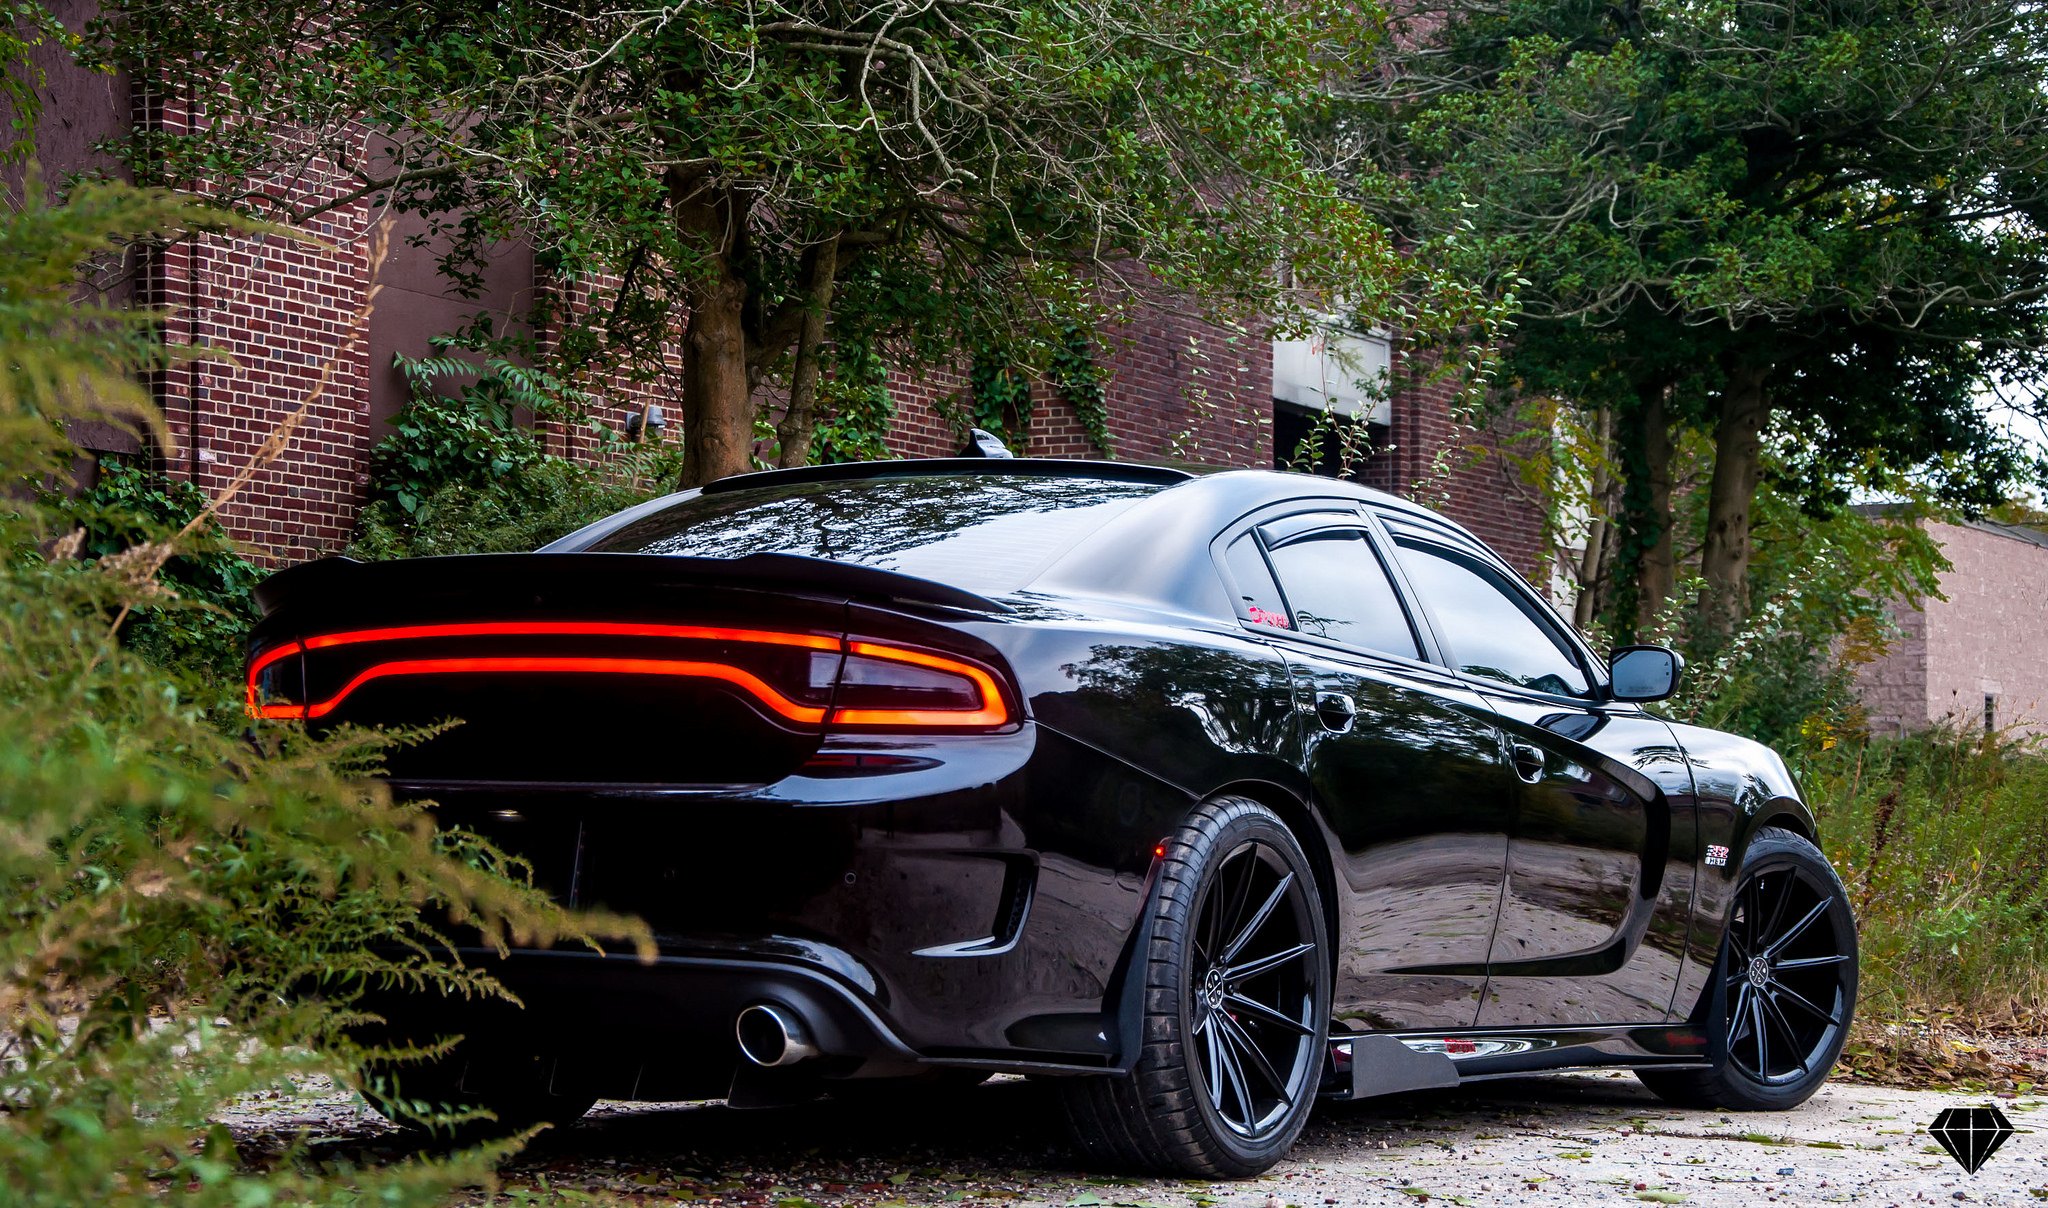 Custom LED Taillights on Black Dodge Charger Scat Pack - Photo by Blaque Diamond Wheels